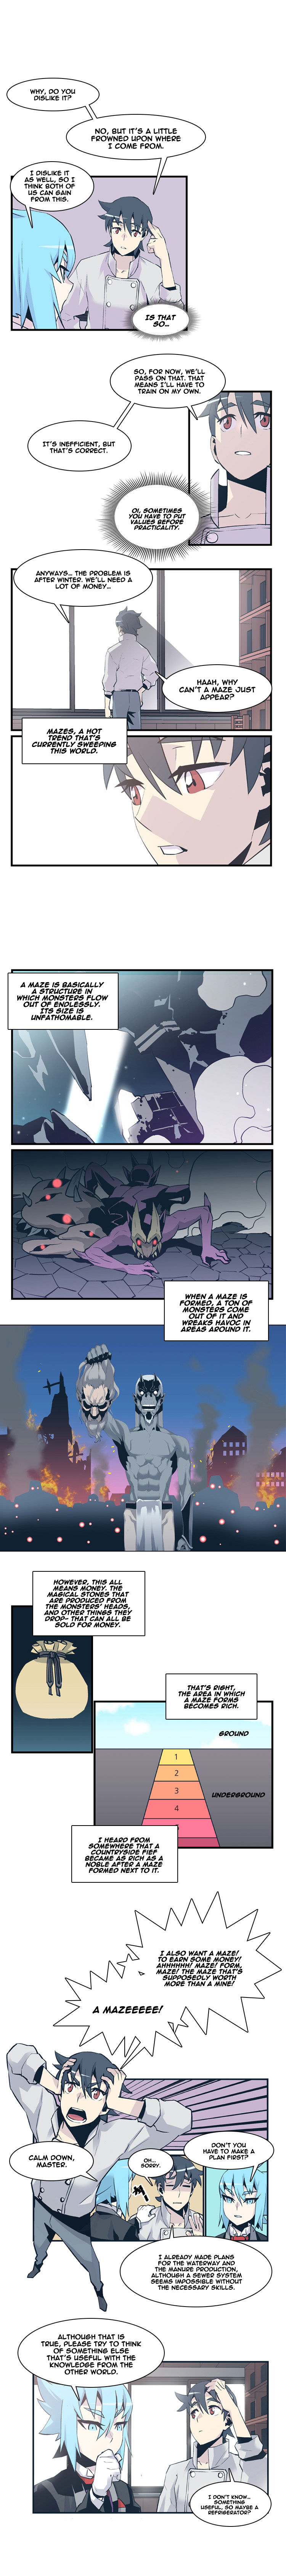 Maze Age Z Chapter 3 Page 1